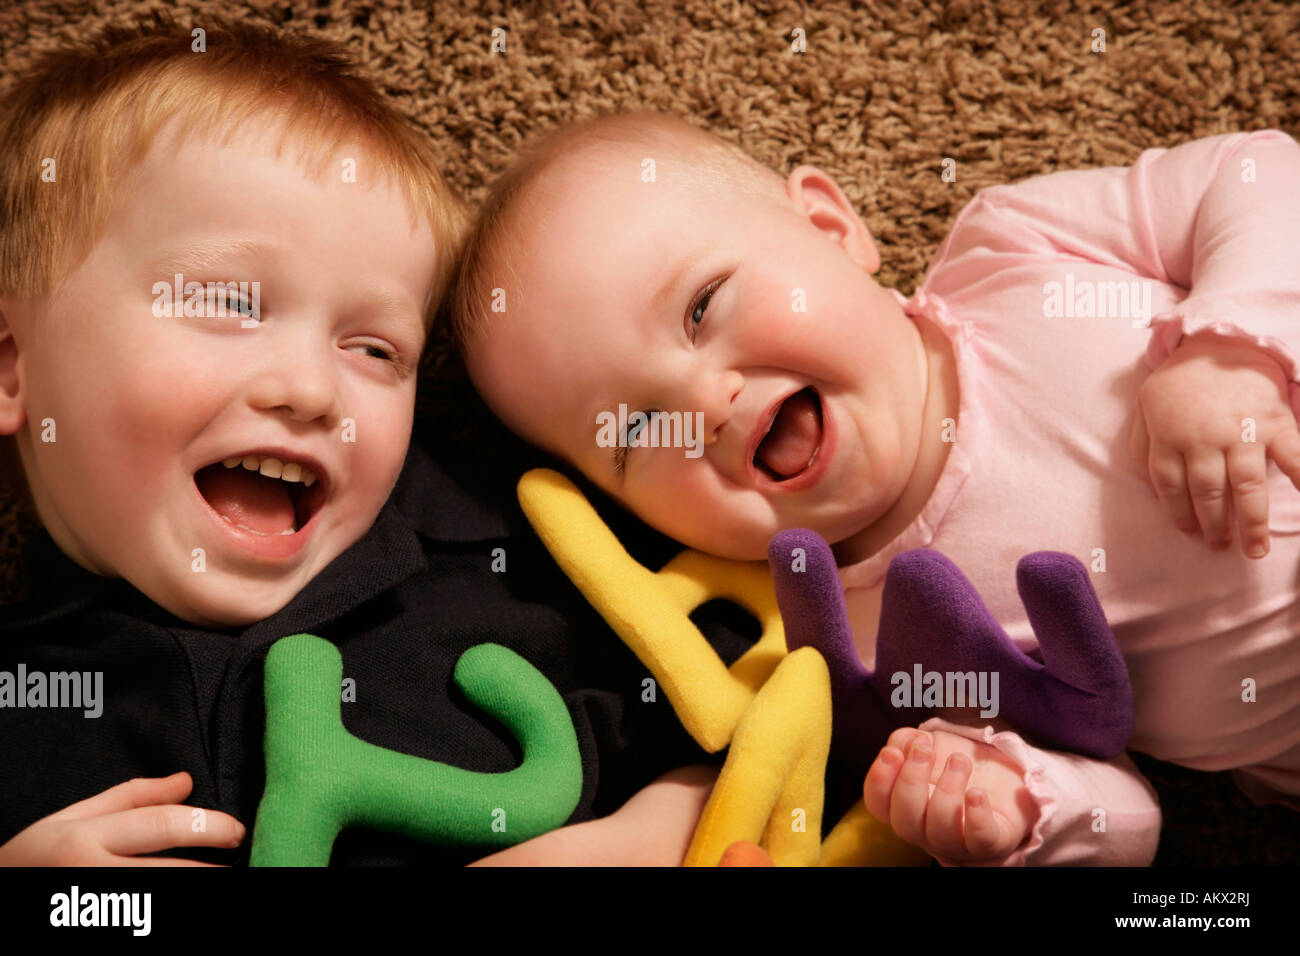 Children playing together Stock Photo